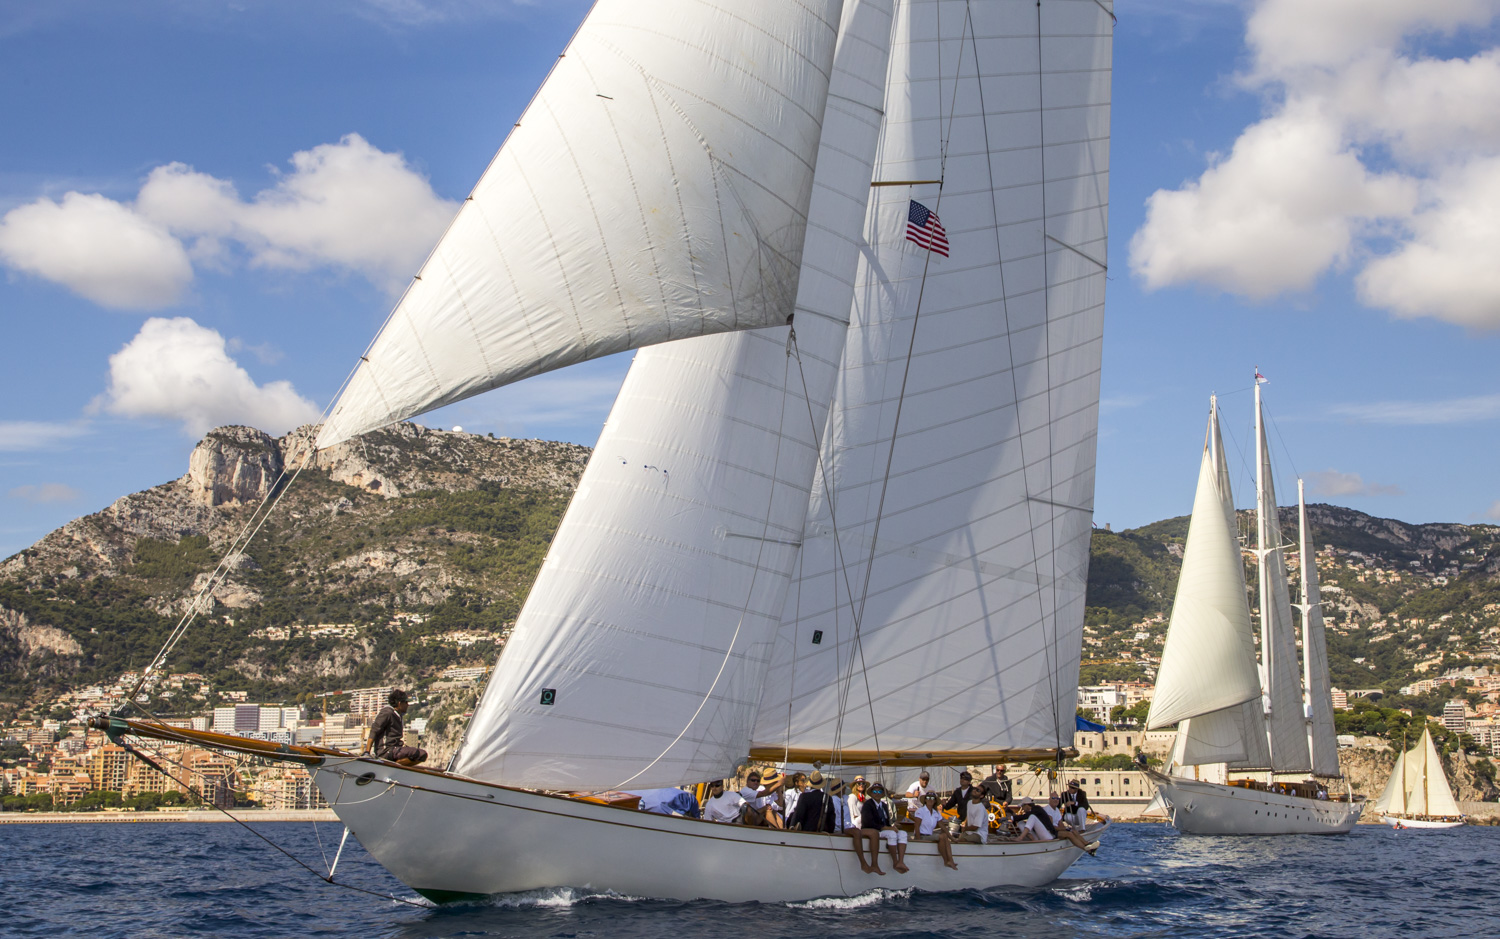 The yacht Germany 1 (GER 89) sails the fourth race of the Louis